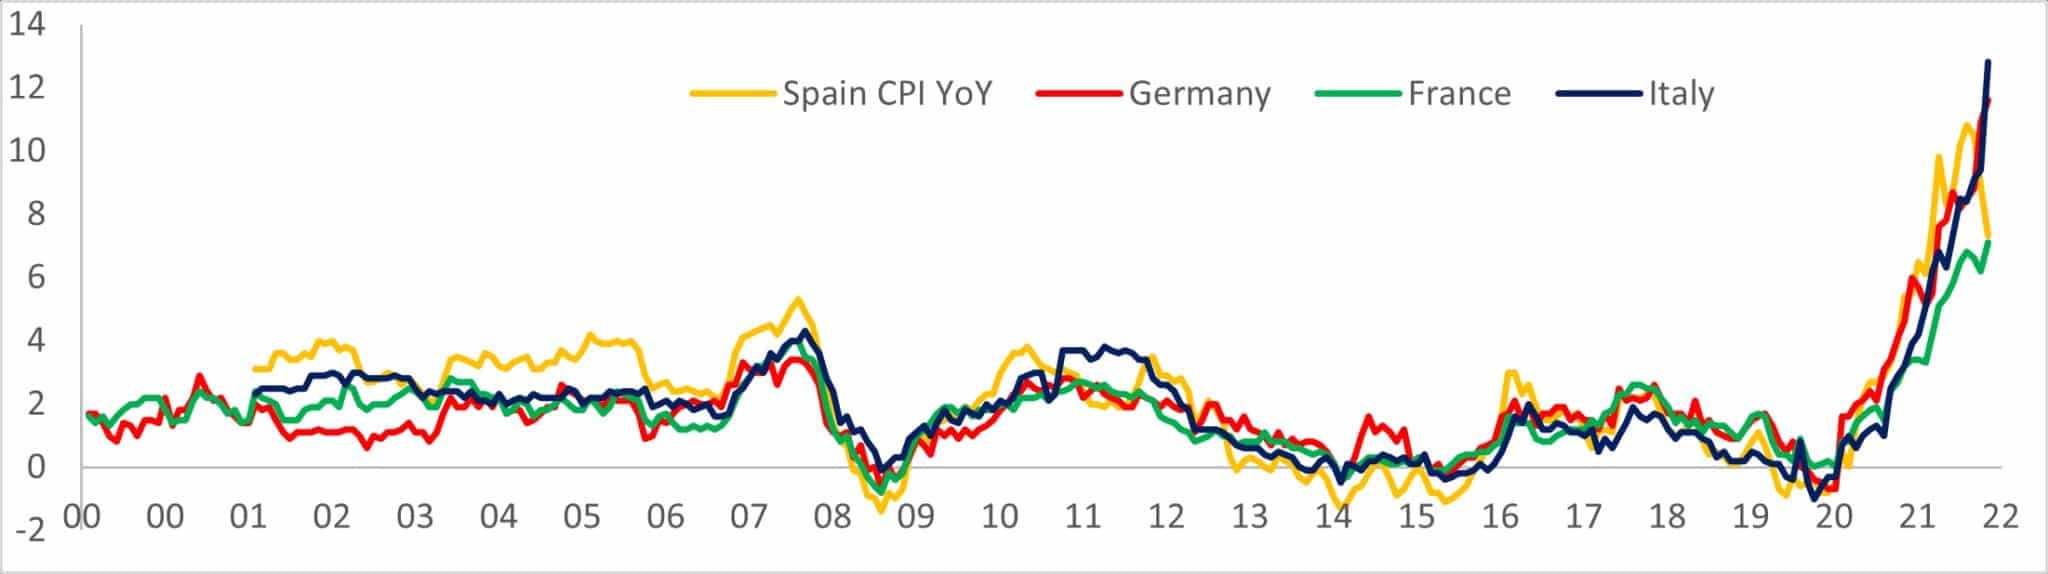 Graph showing the YoY increase in CPI in Spain, Germany, France, and Italy from 2000 to 2022